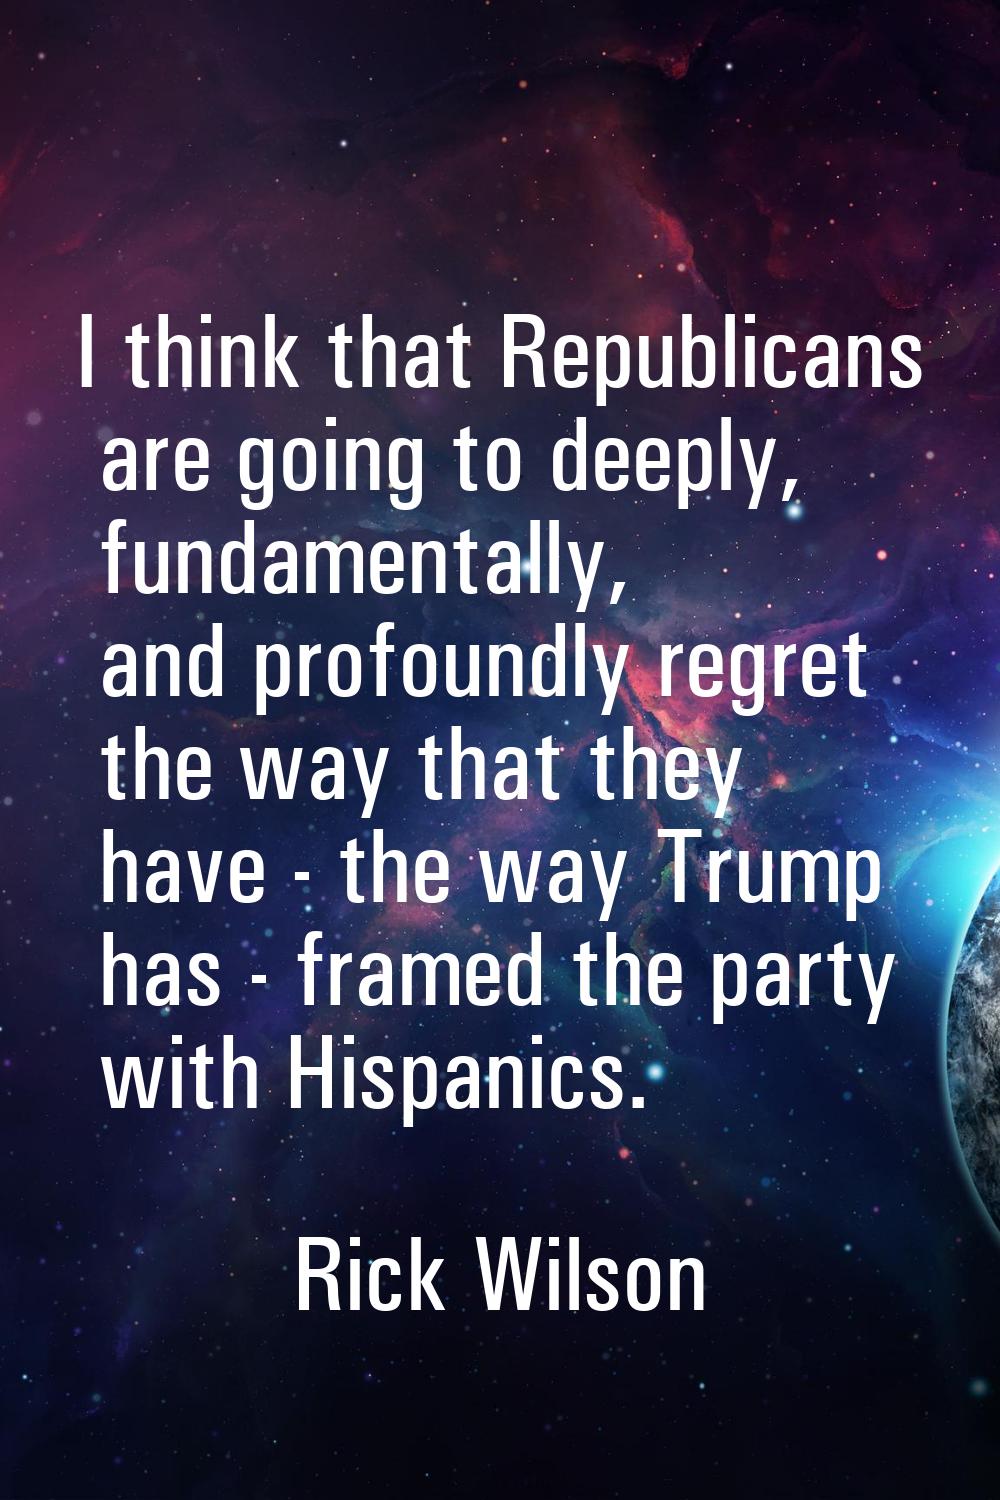 I think that Republicans are going to deeply, fundamentally, and profoundly regret the way that the